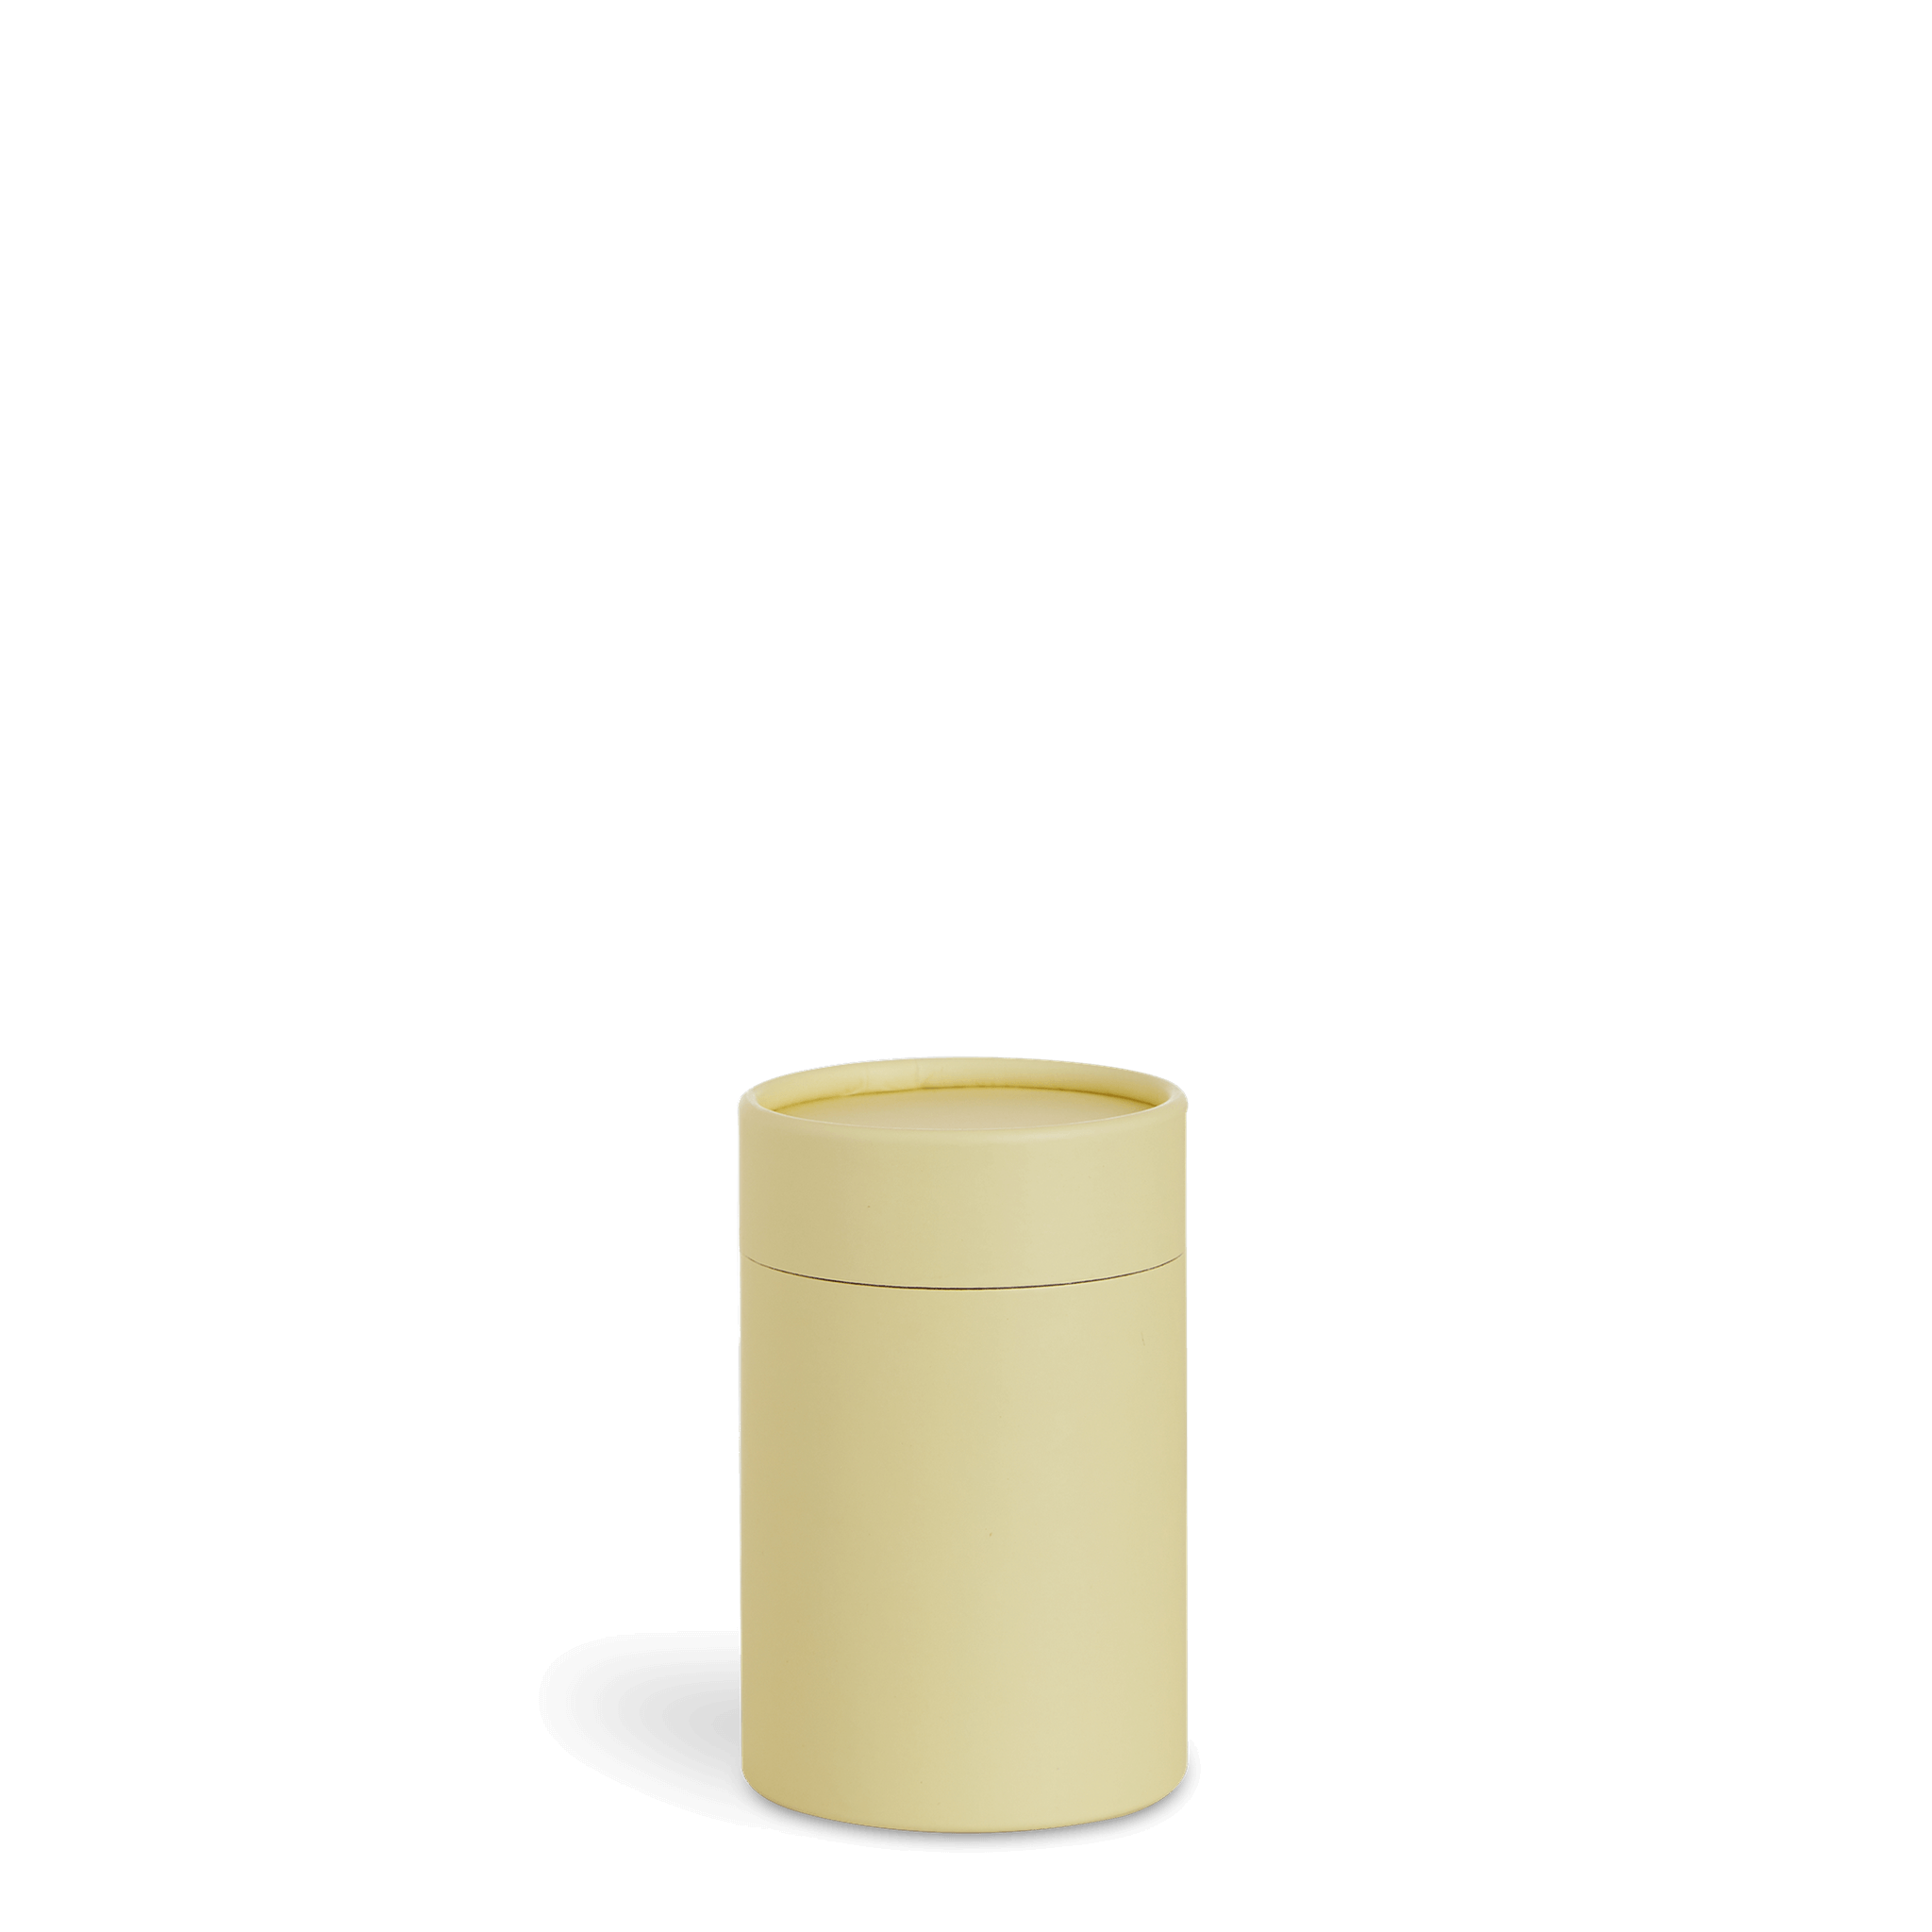 Sample Recyclable Three-Piece Cylinders